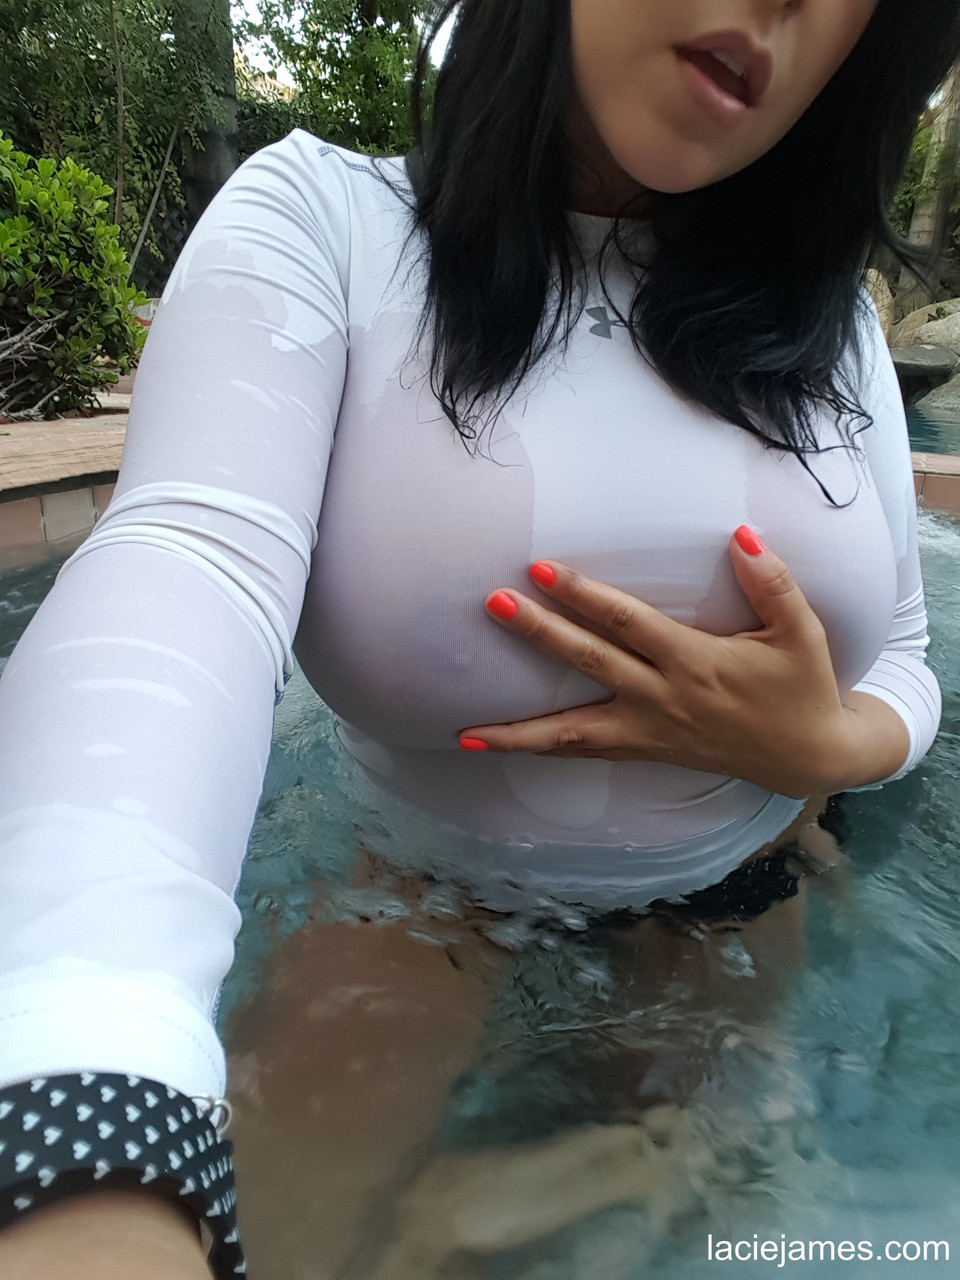 Brunette Milf Lacie James Shows Her Big Boobs While Taking Selfies In The Pool